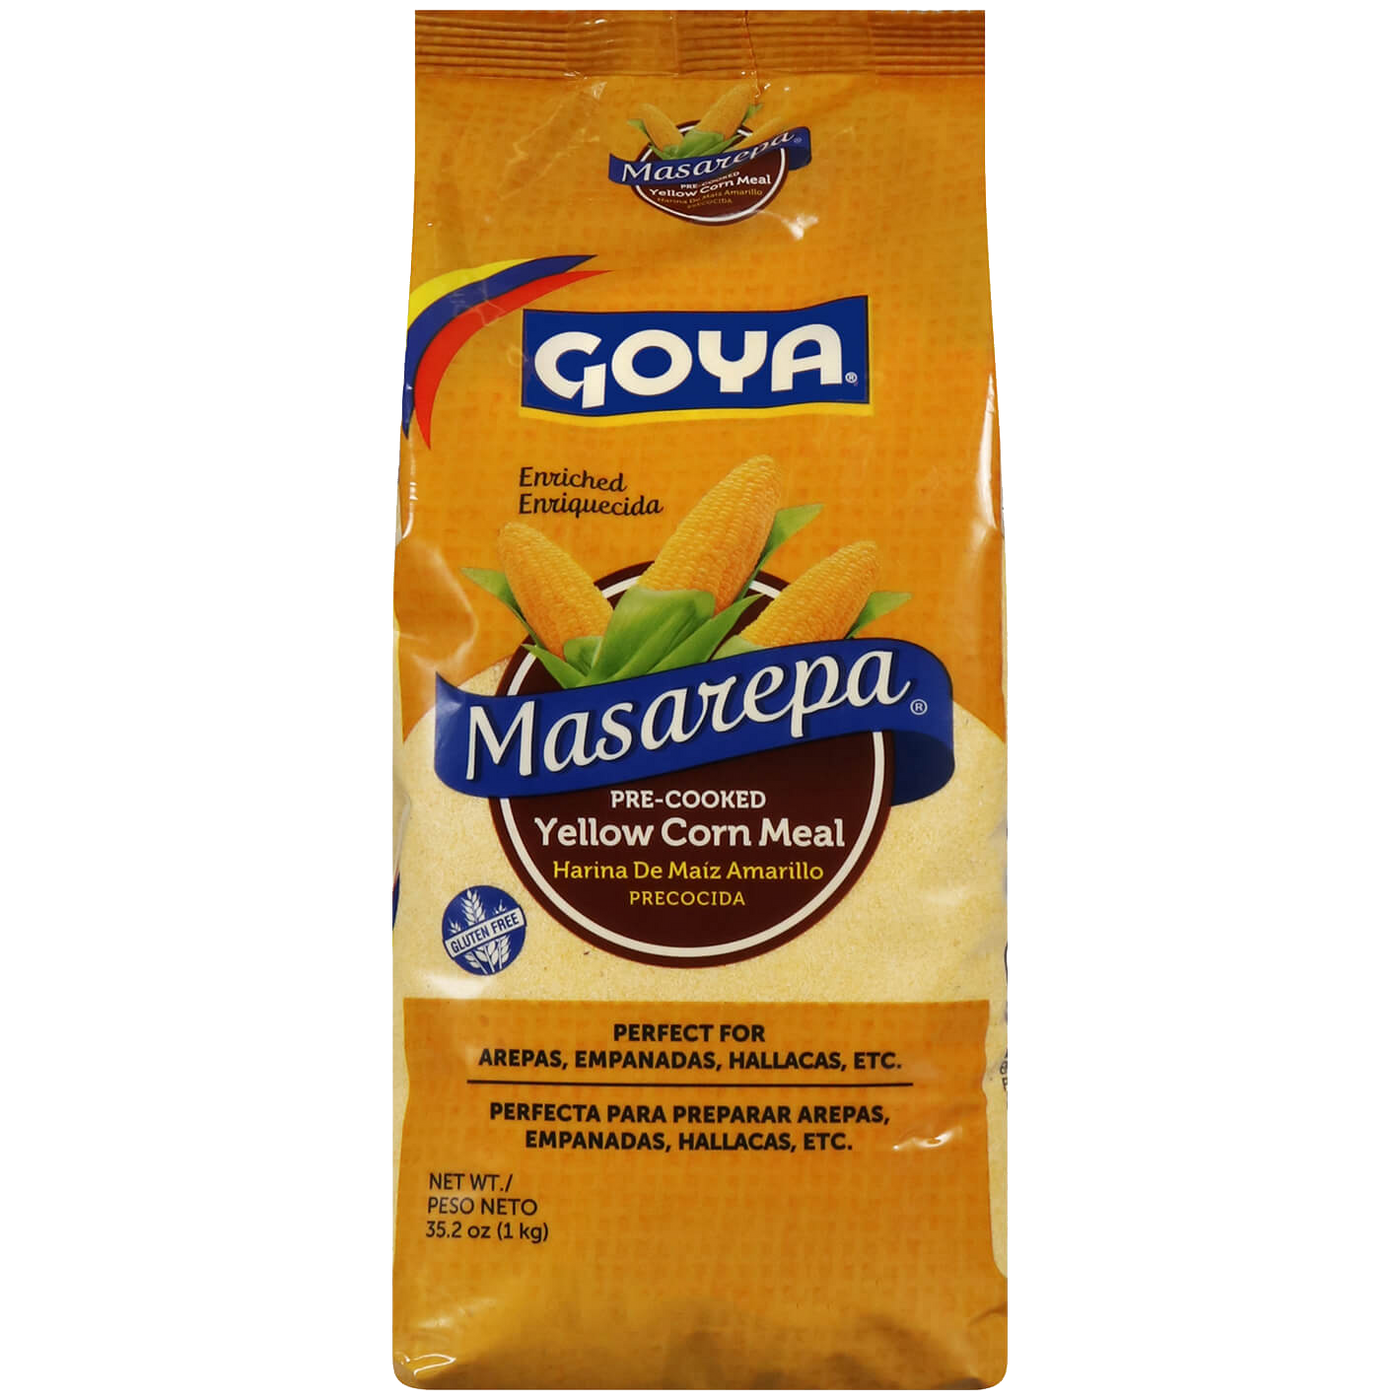   Goya Pre-Cooked Yellow Corn Meal